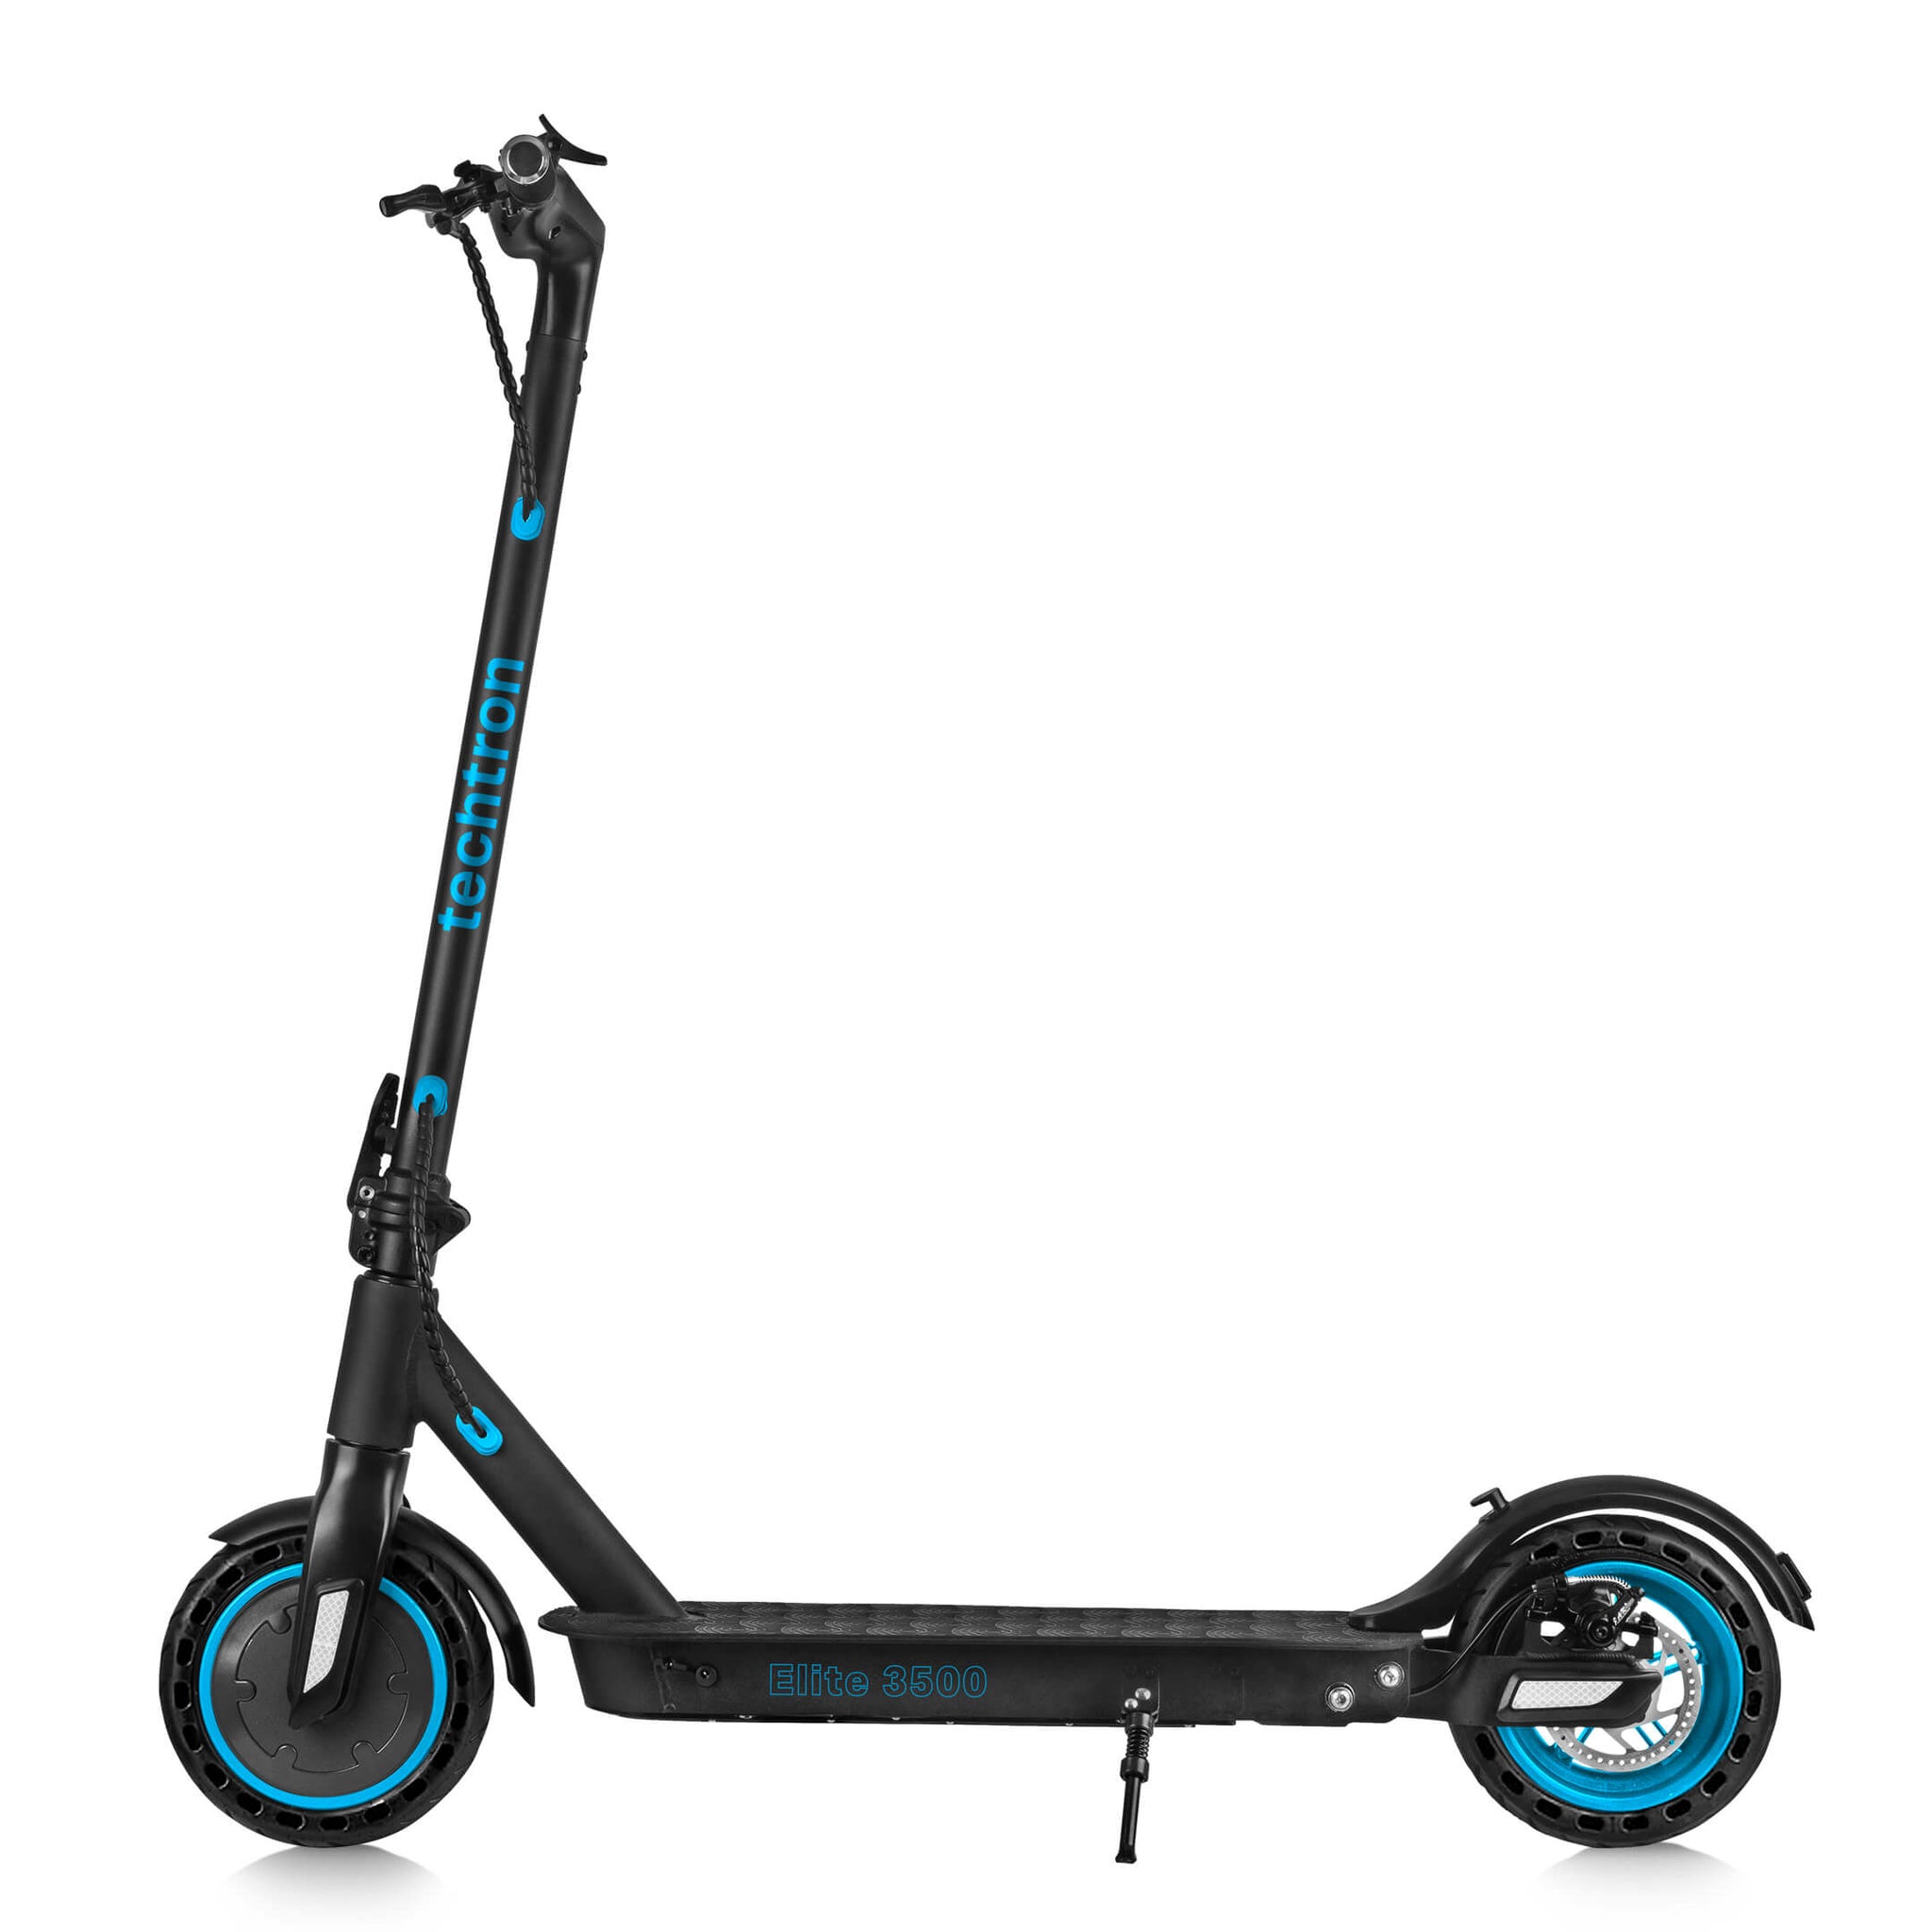 techtron Elite 3500 Electric Scooter - Blue – The Electric Scooter Store